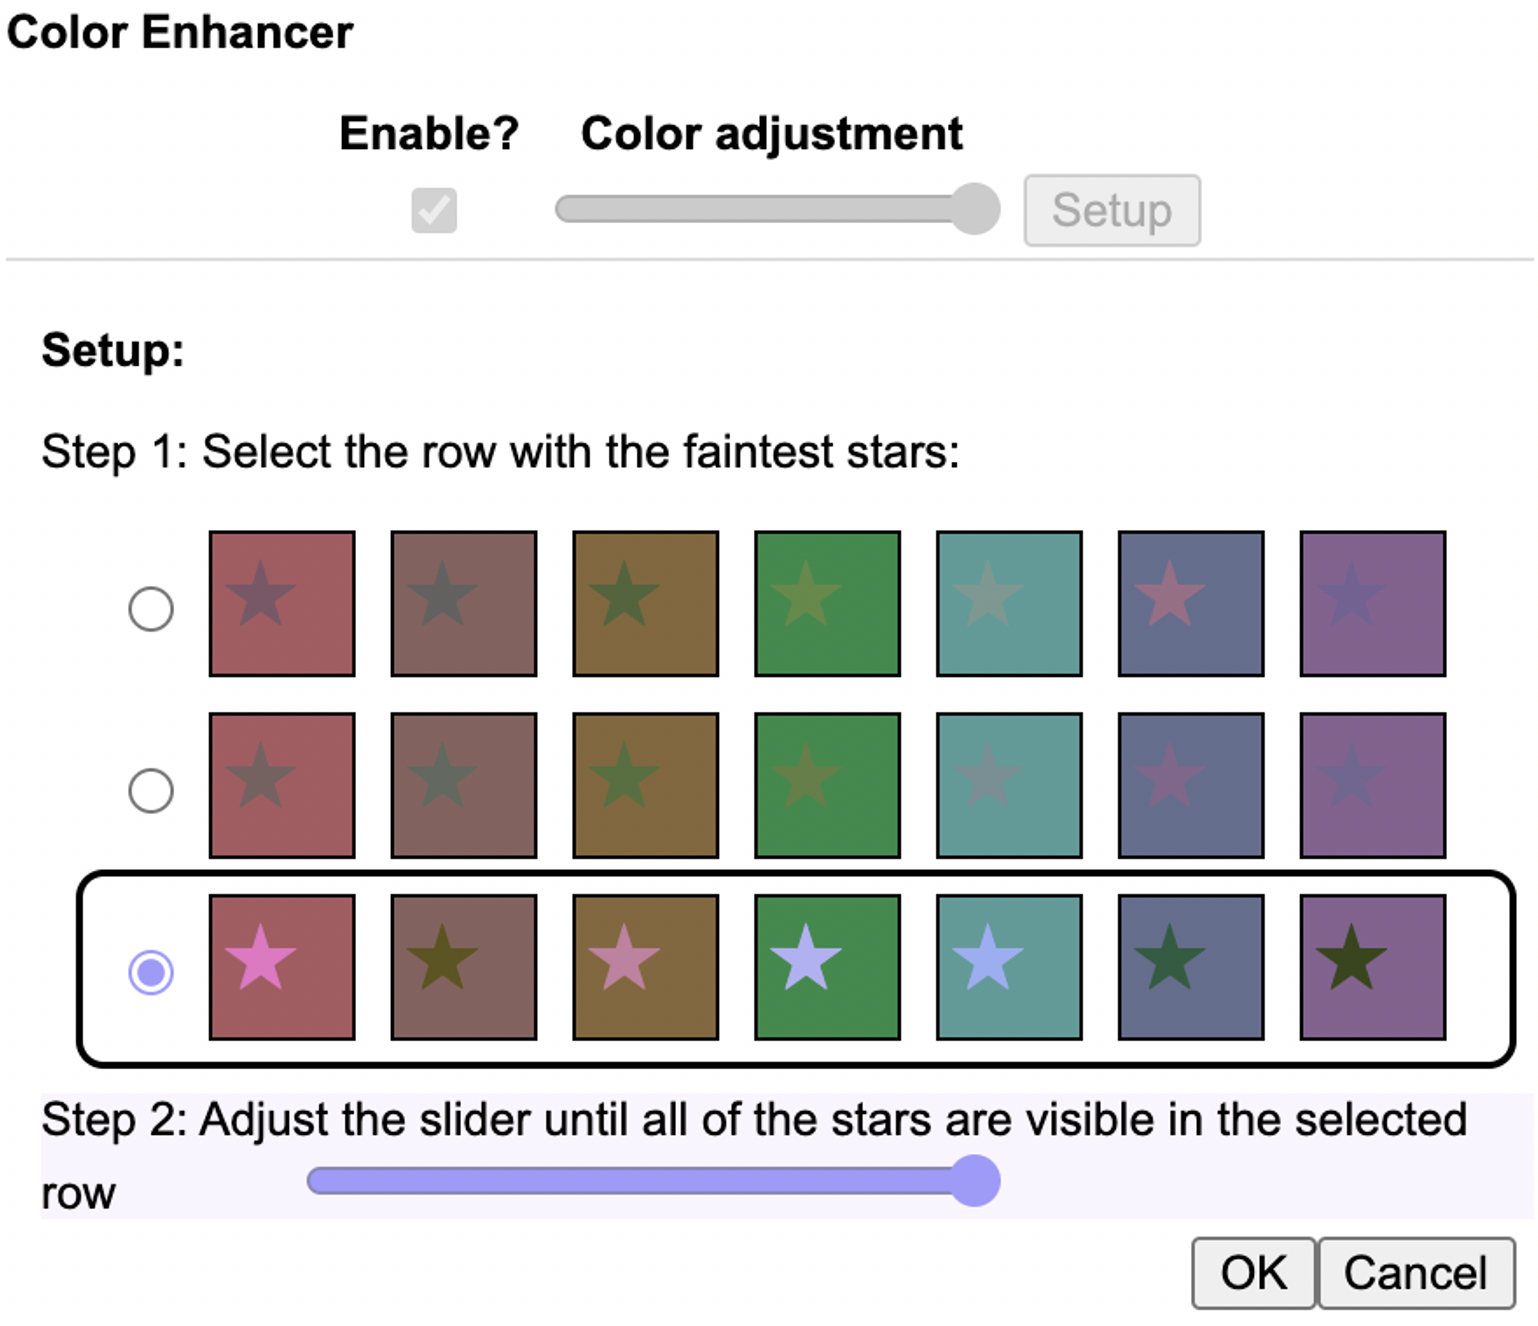 Screenshot of the Color Enhancement user interface.